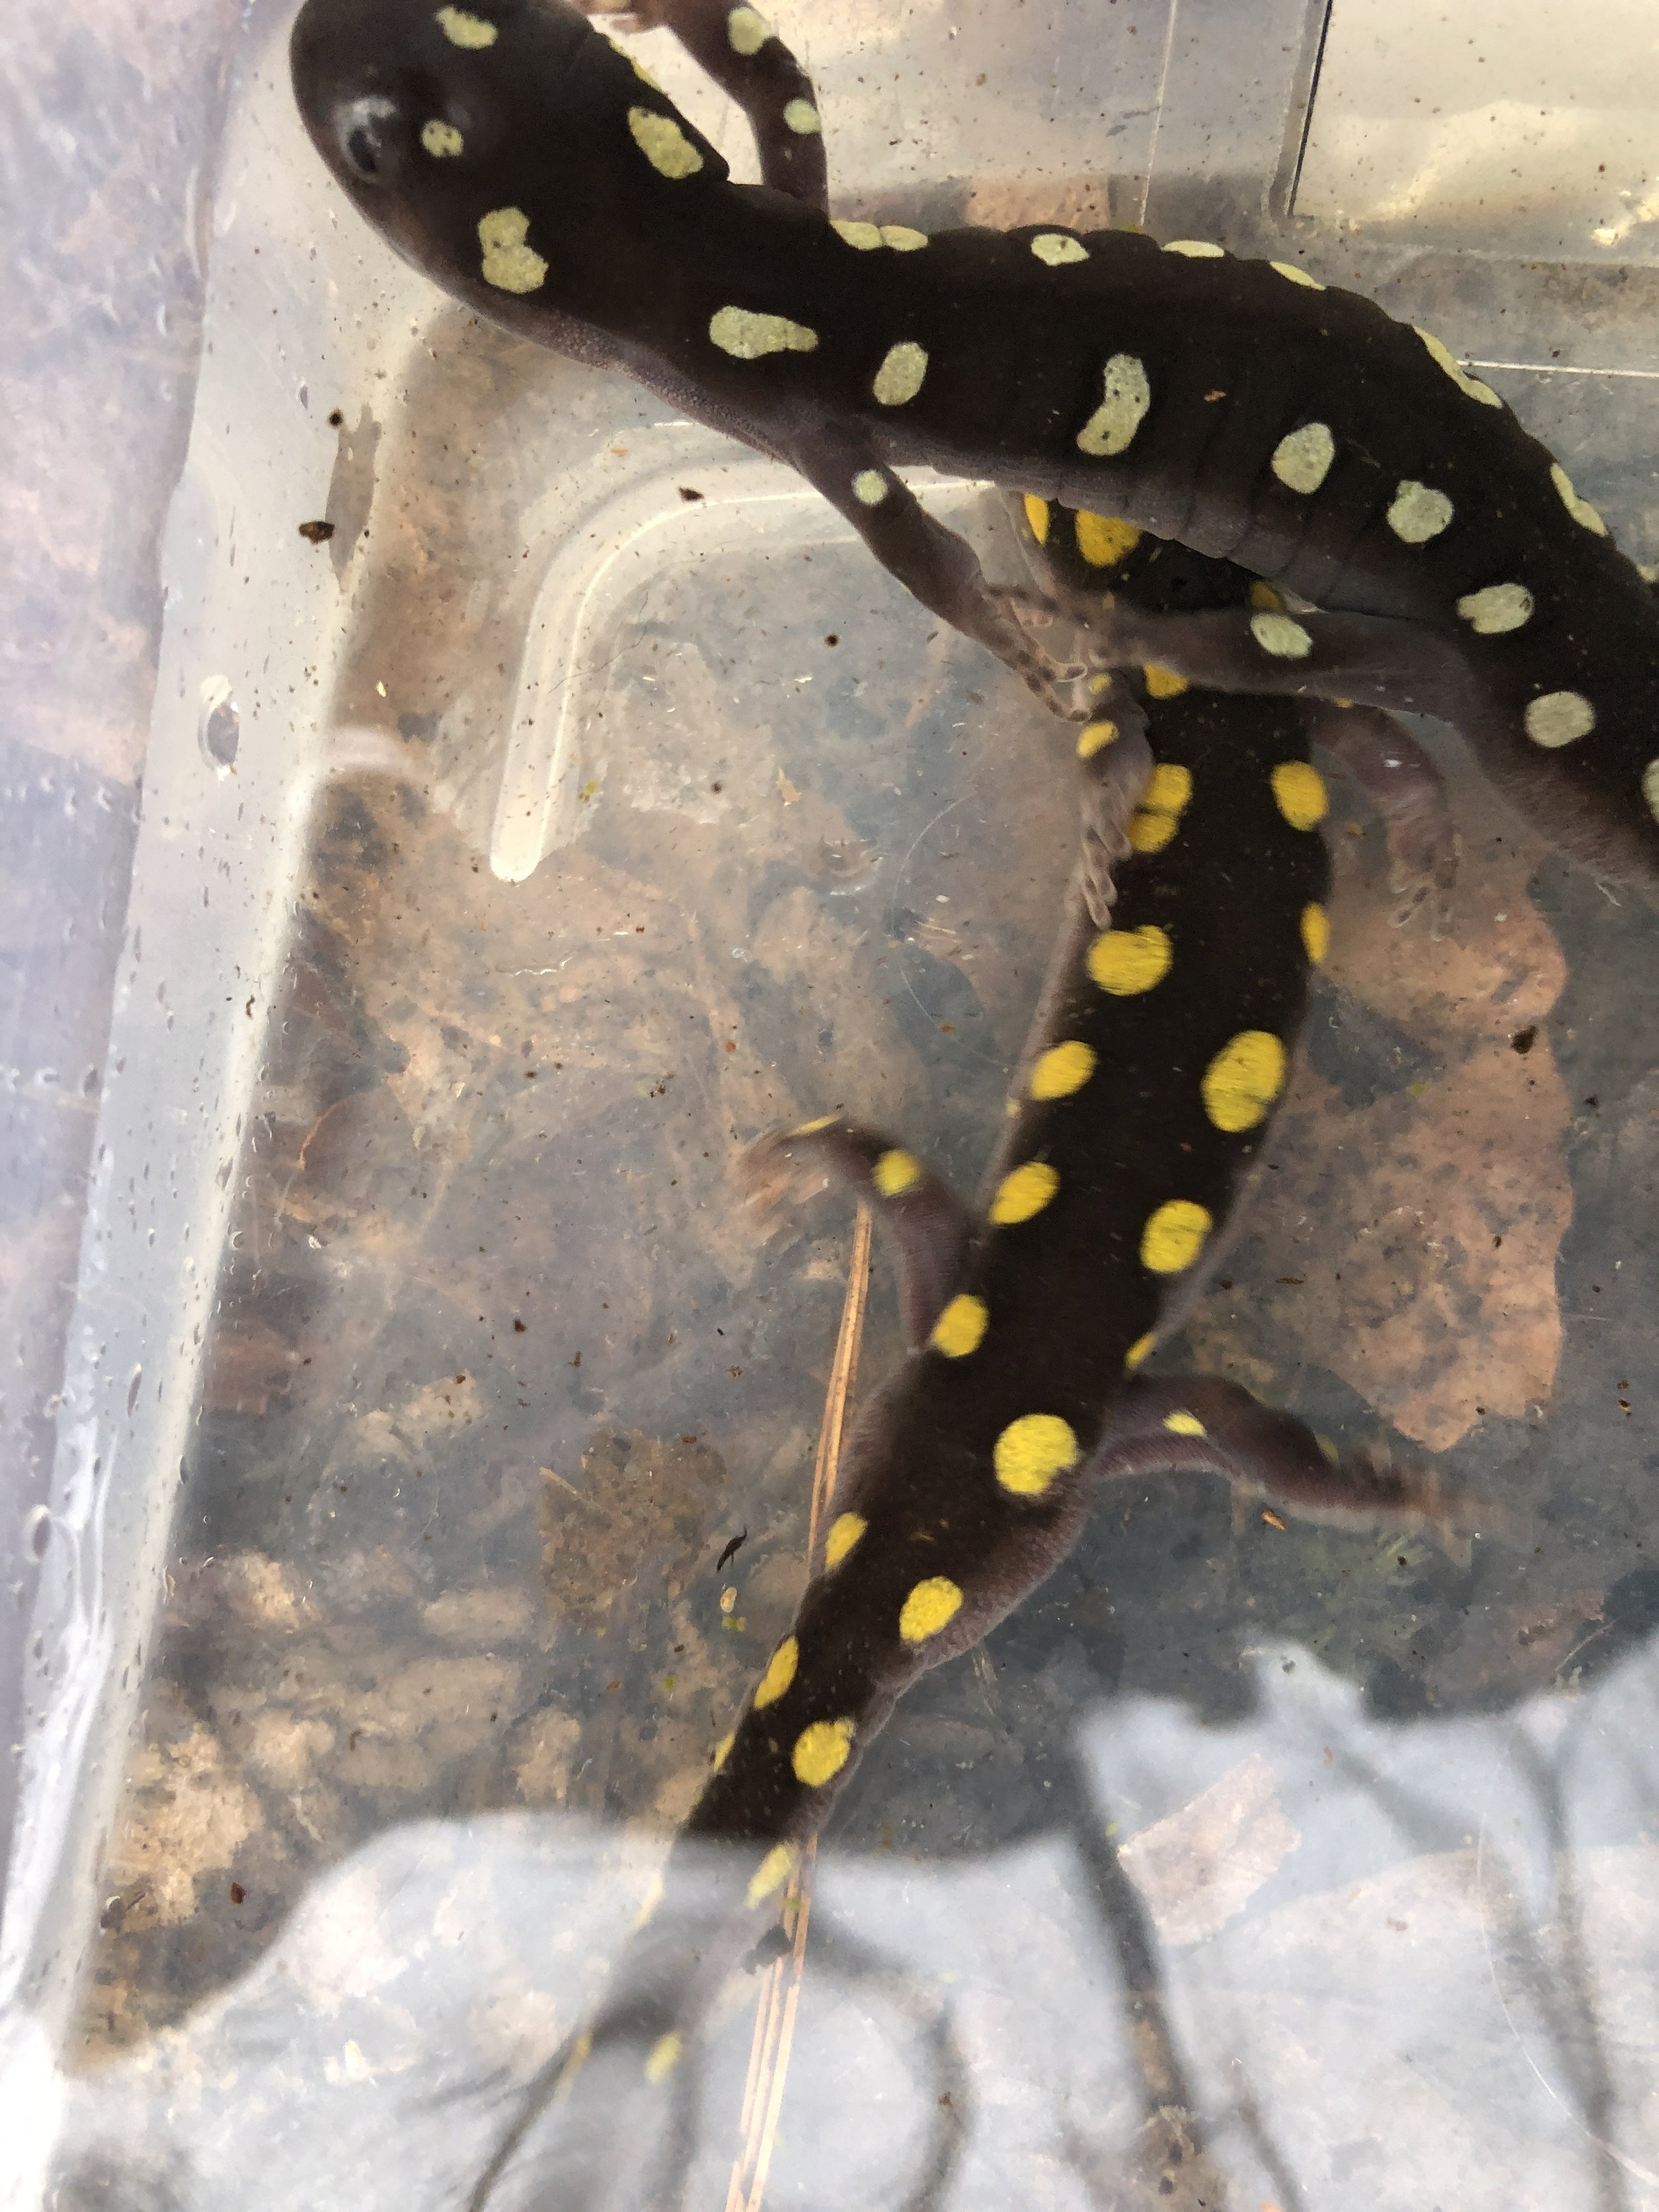 Two spotted salamanders, one with yellow spots and one with gray